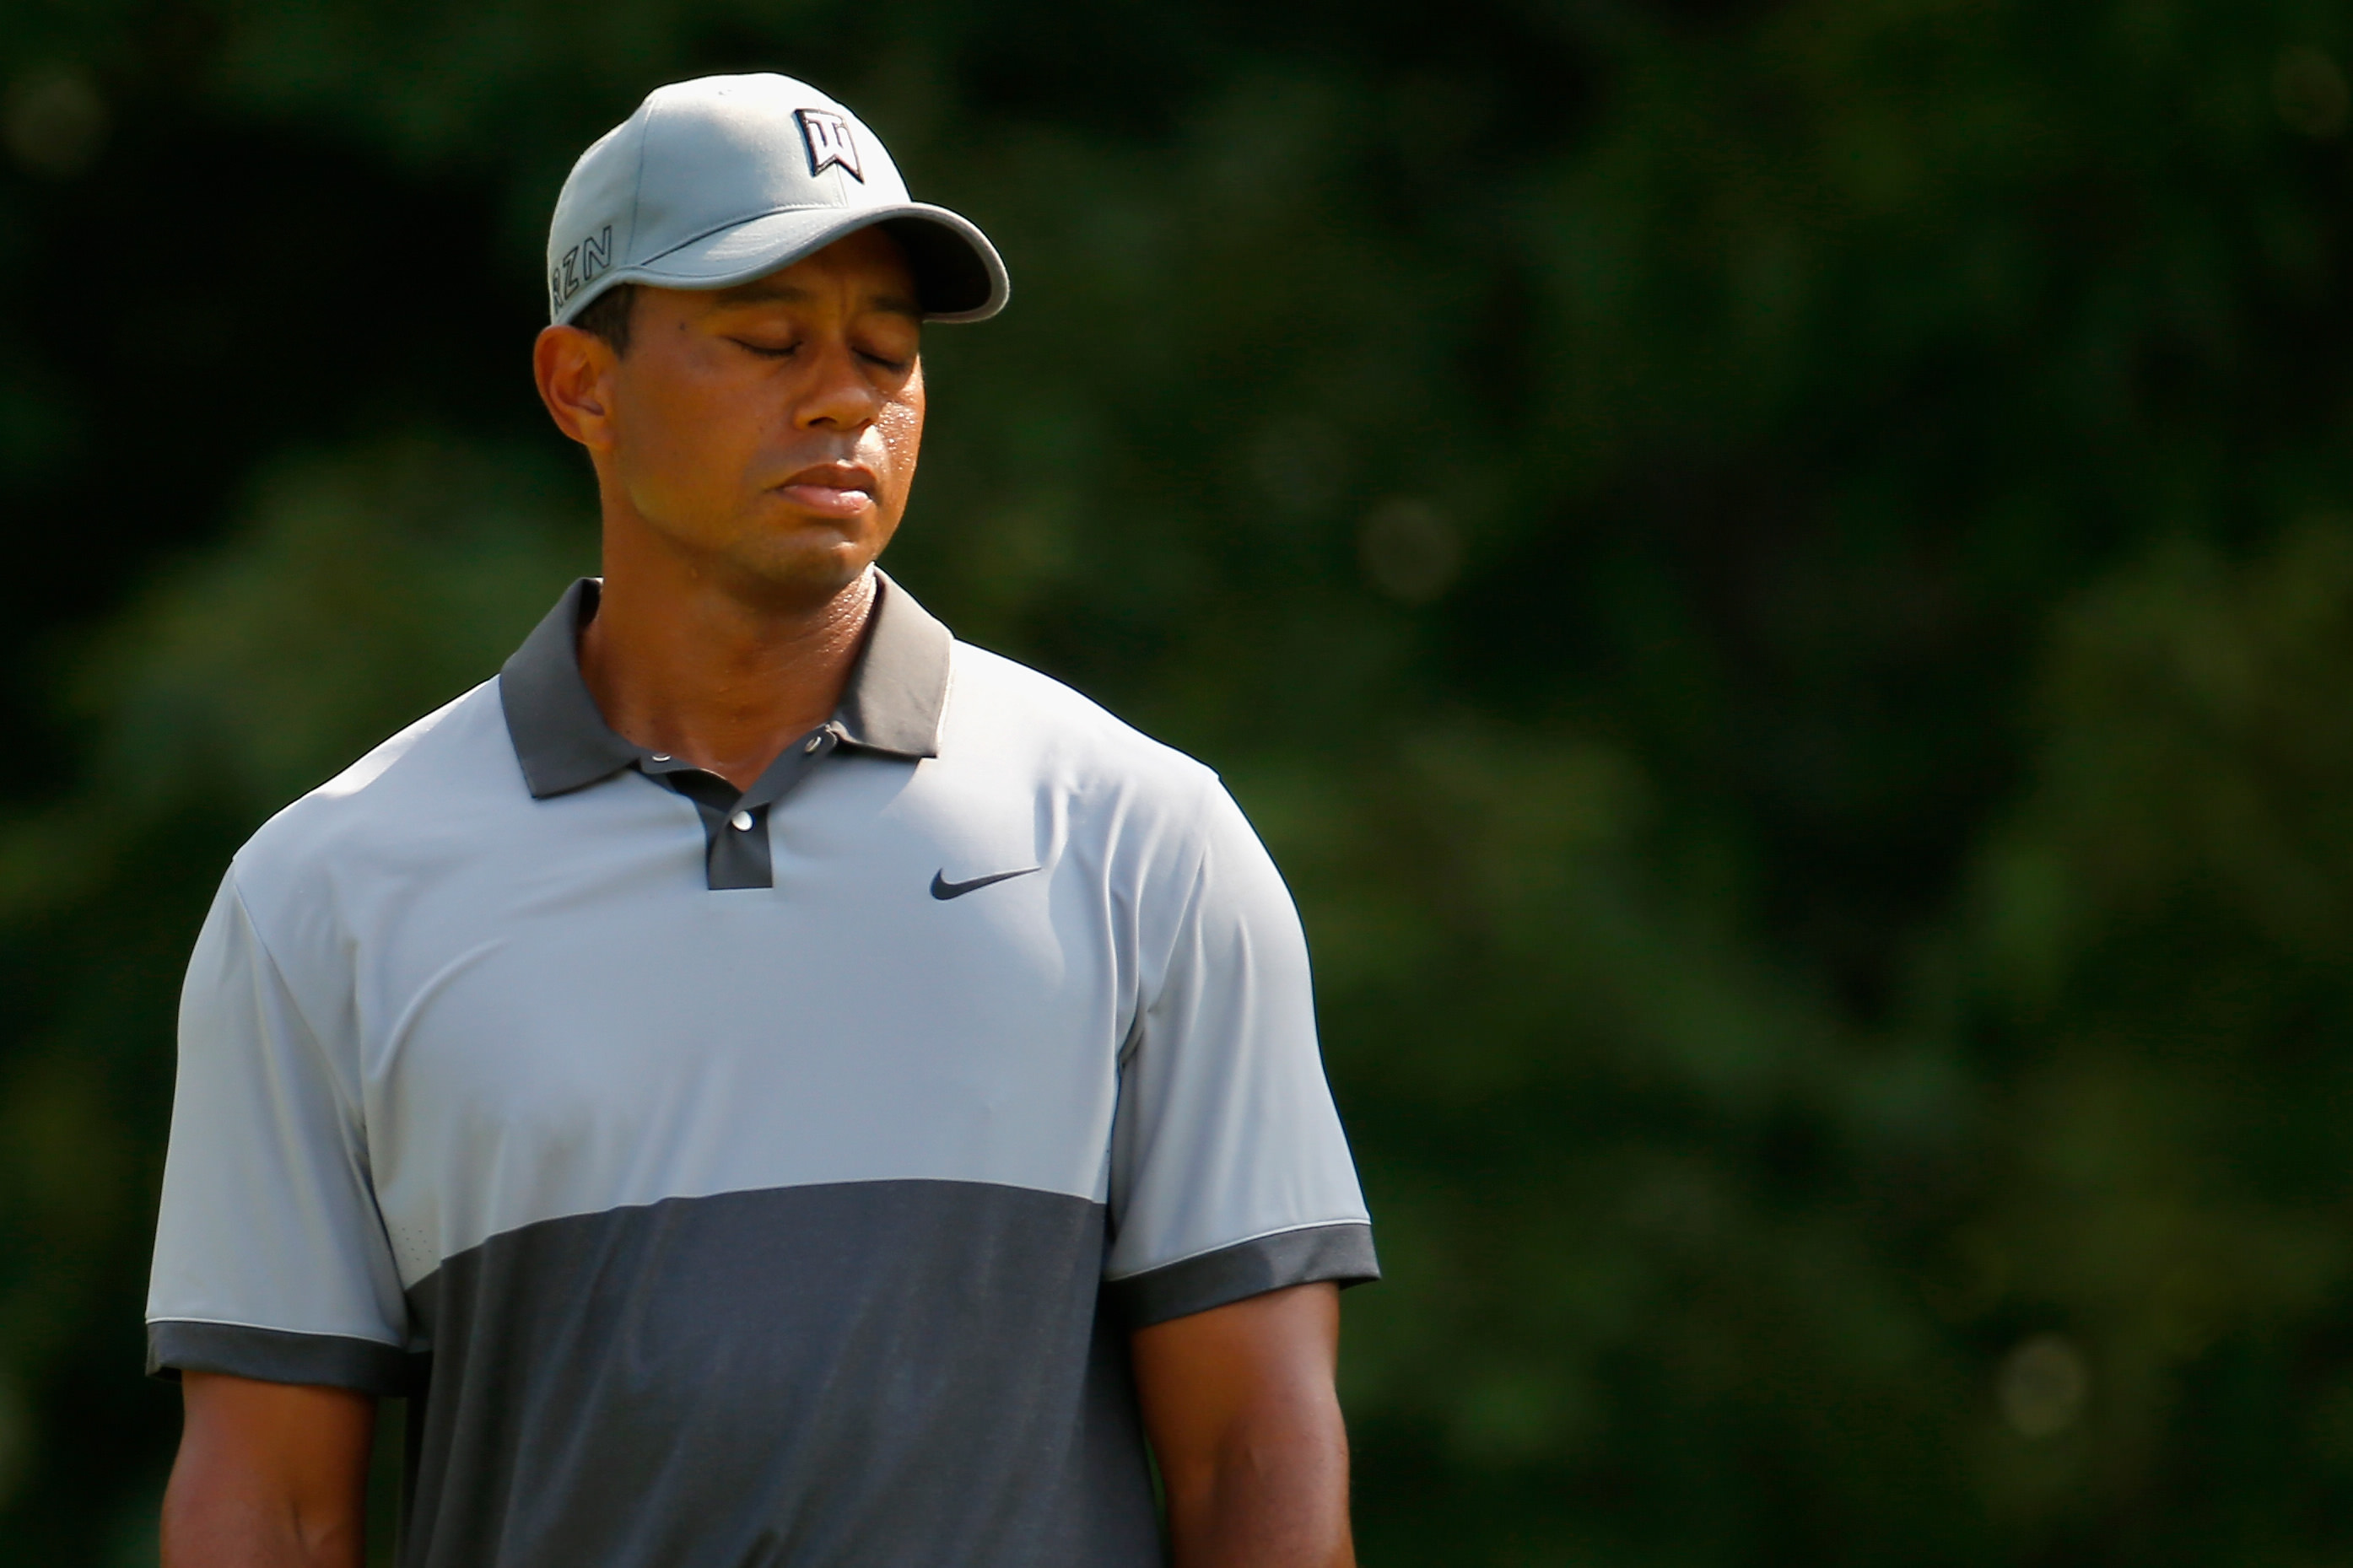 Tiger Woods coming back